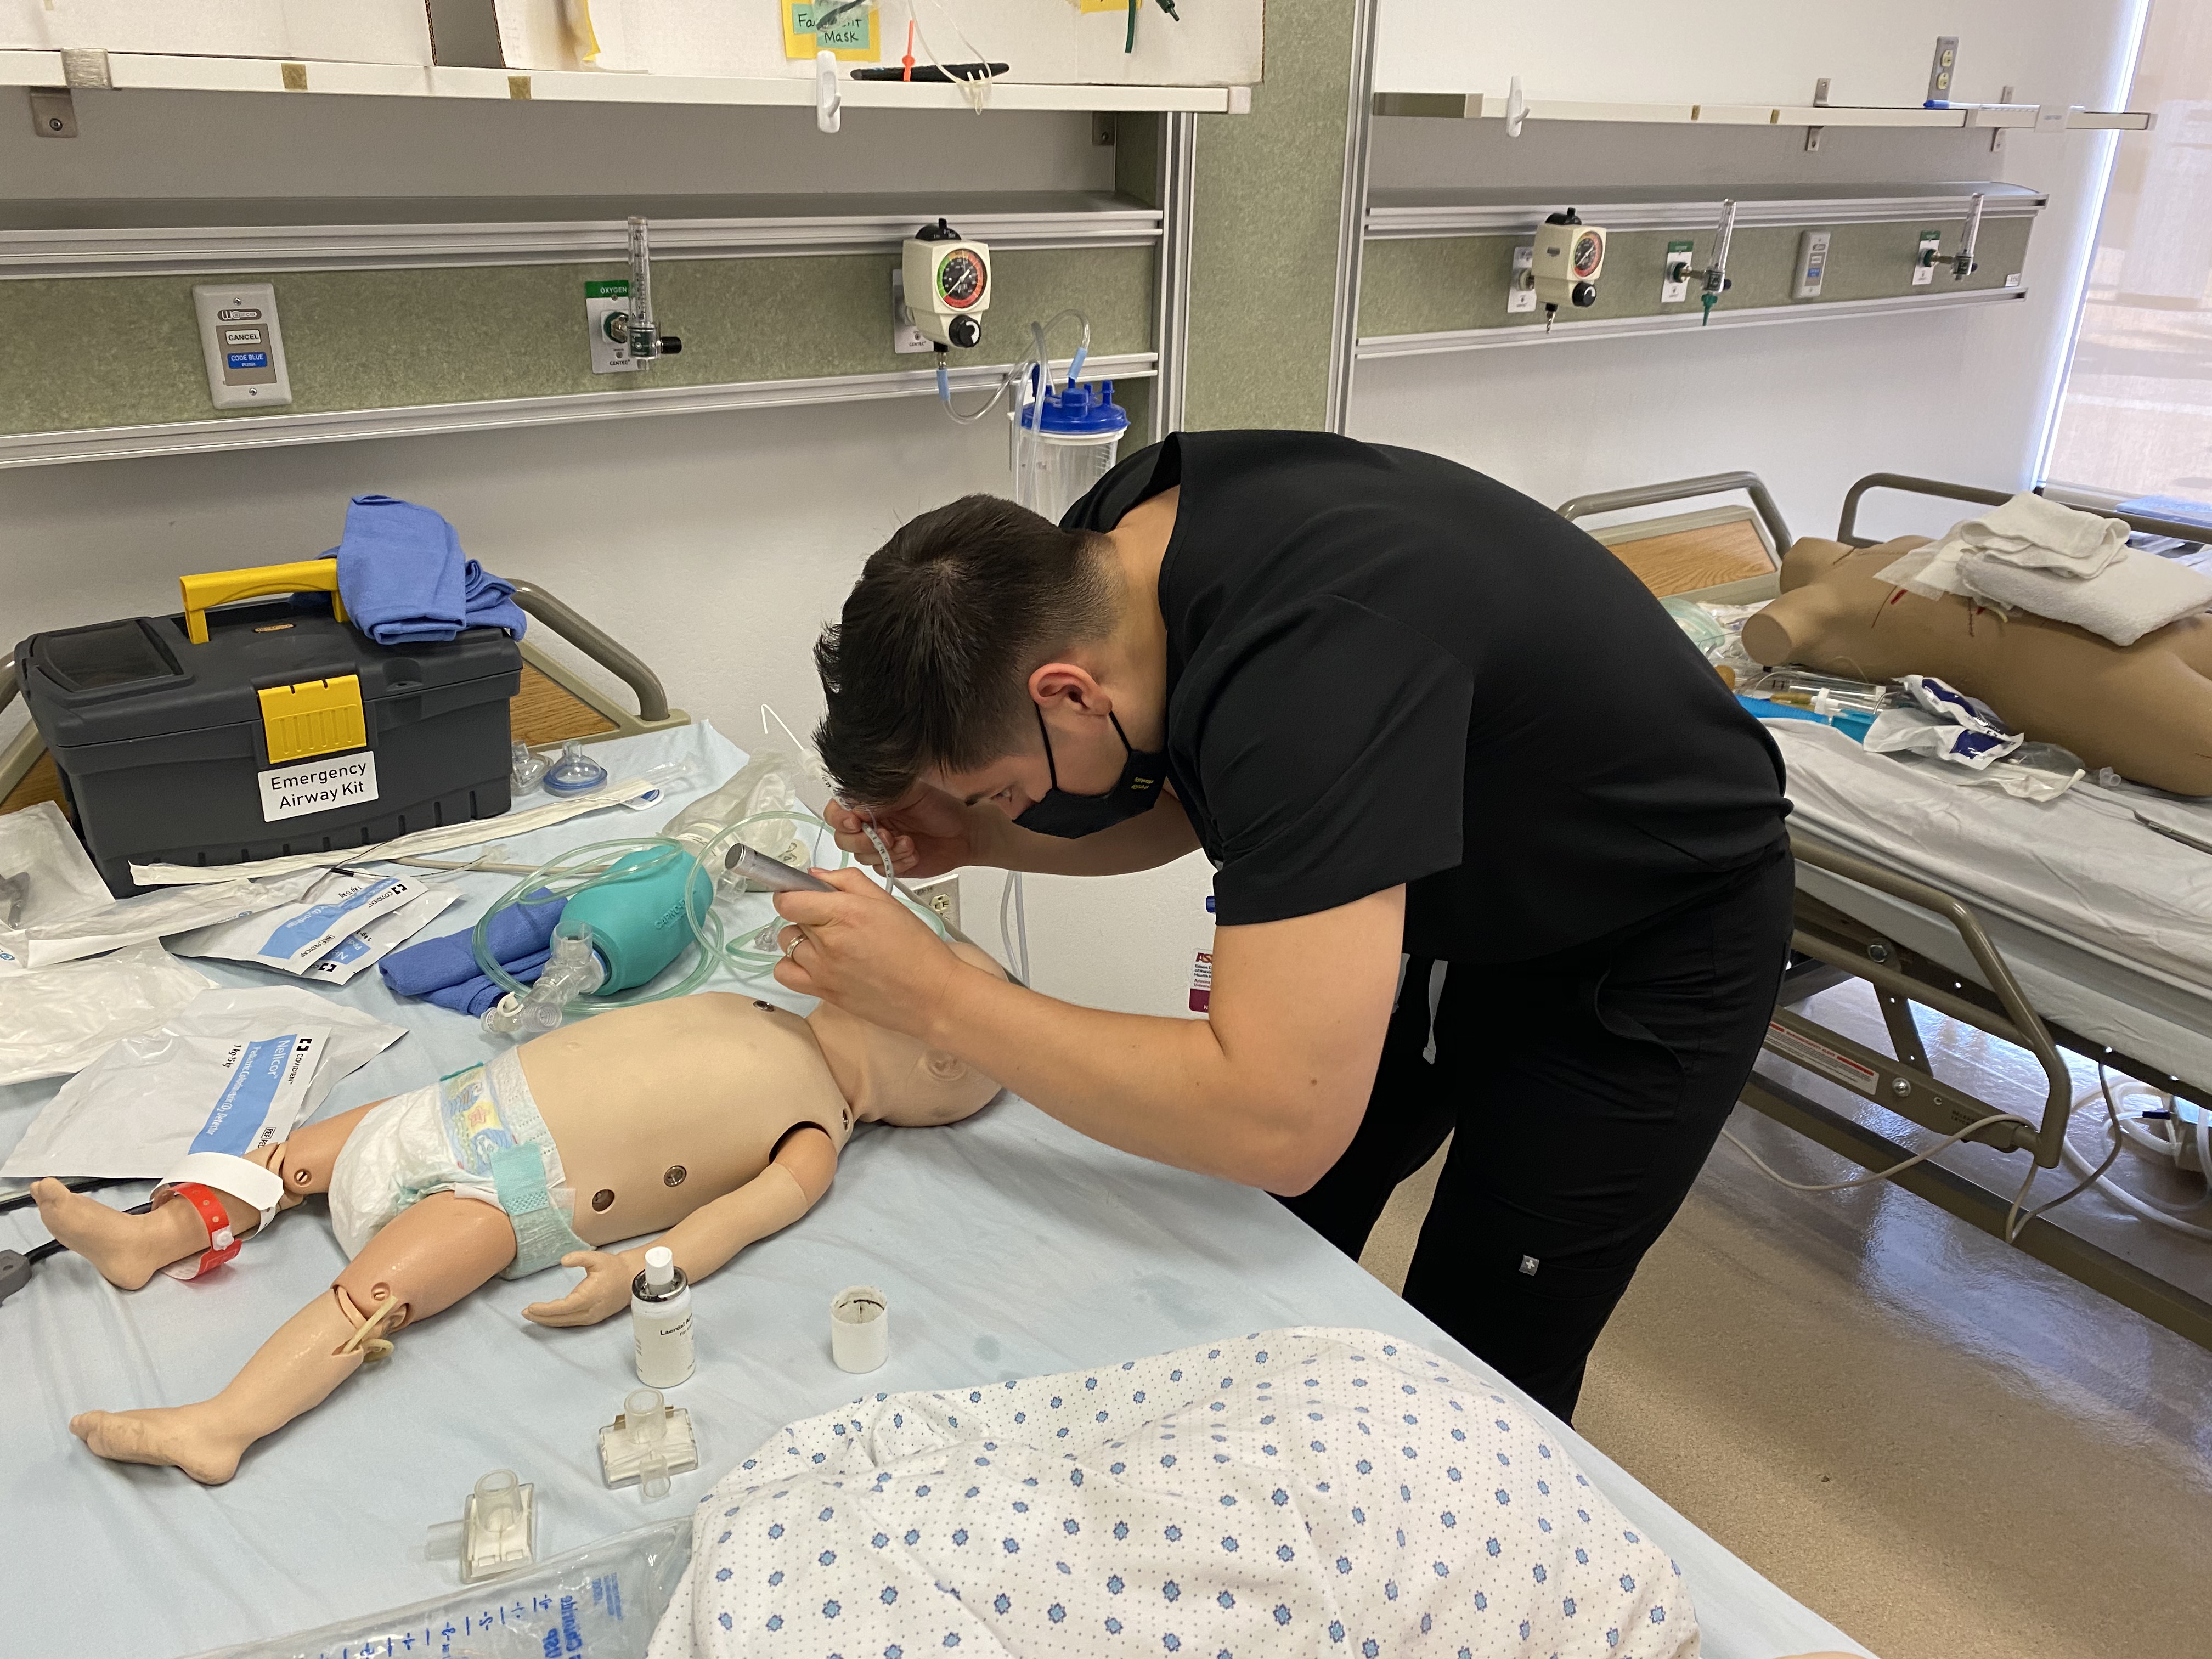 Reynaldo Kieser participates in an immersion experience, opening the airway of a pediatric patient